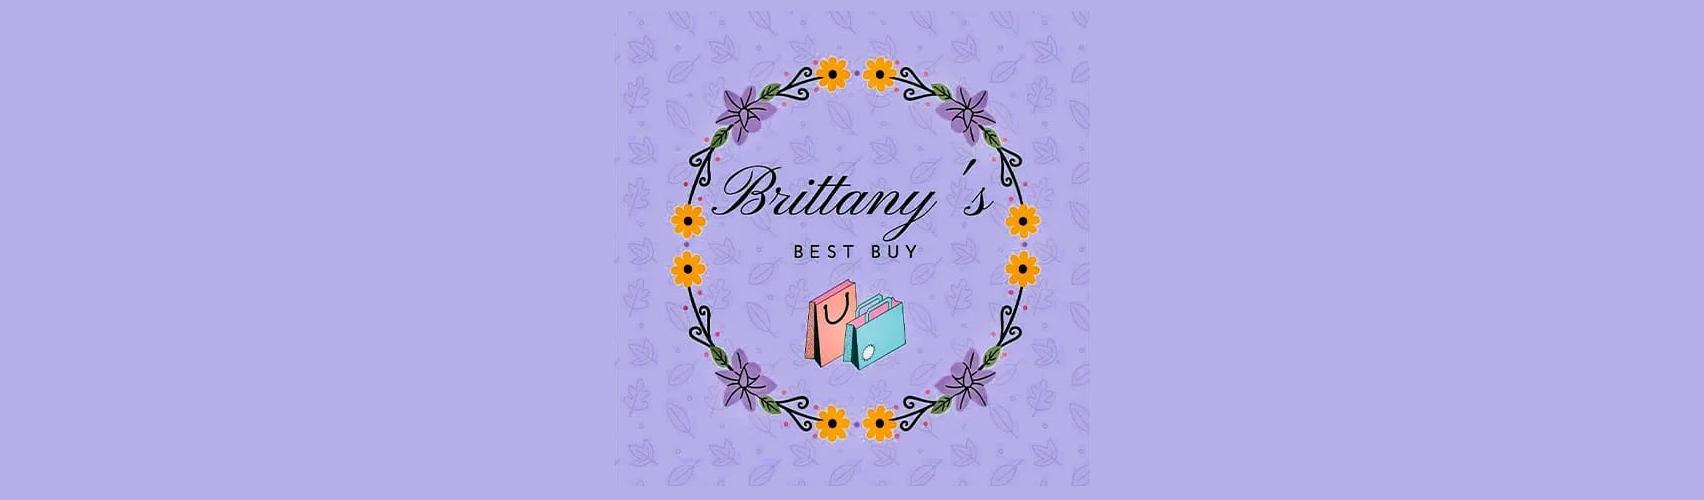 Brittany's Best Buy